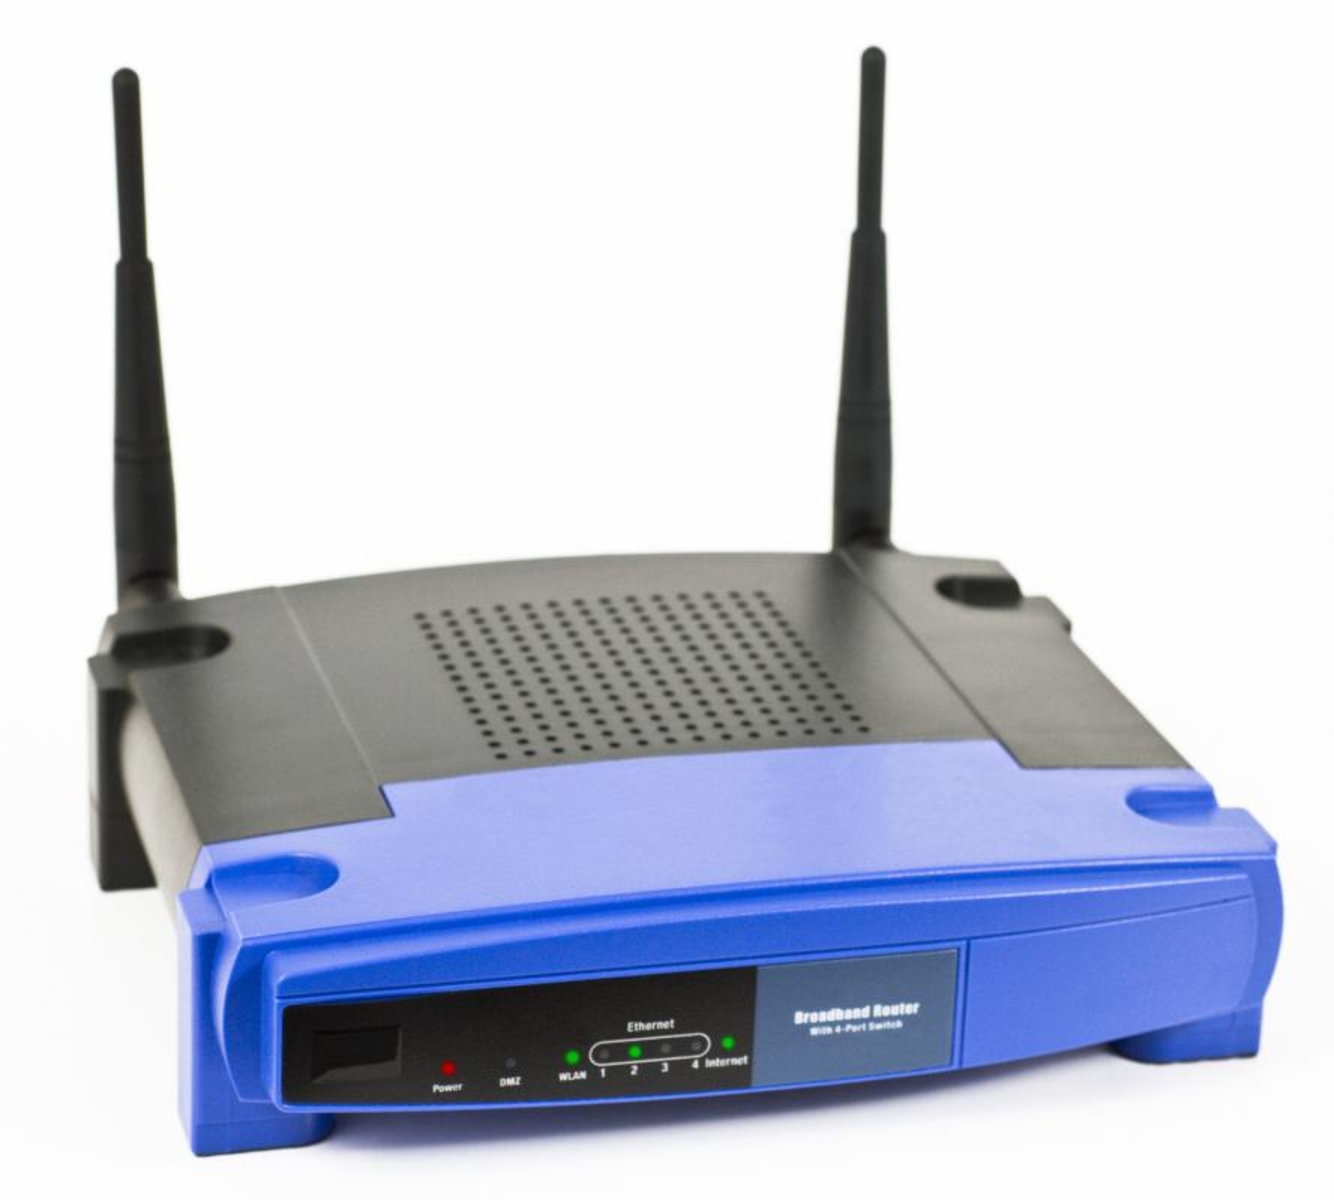 How To Open Ports On A Wireless Router